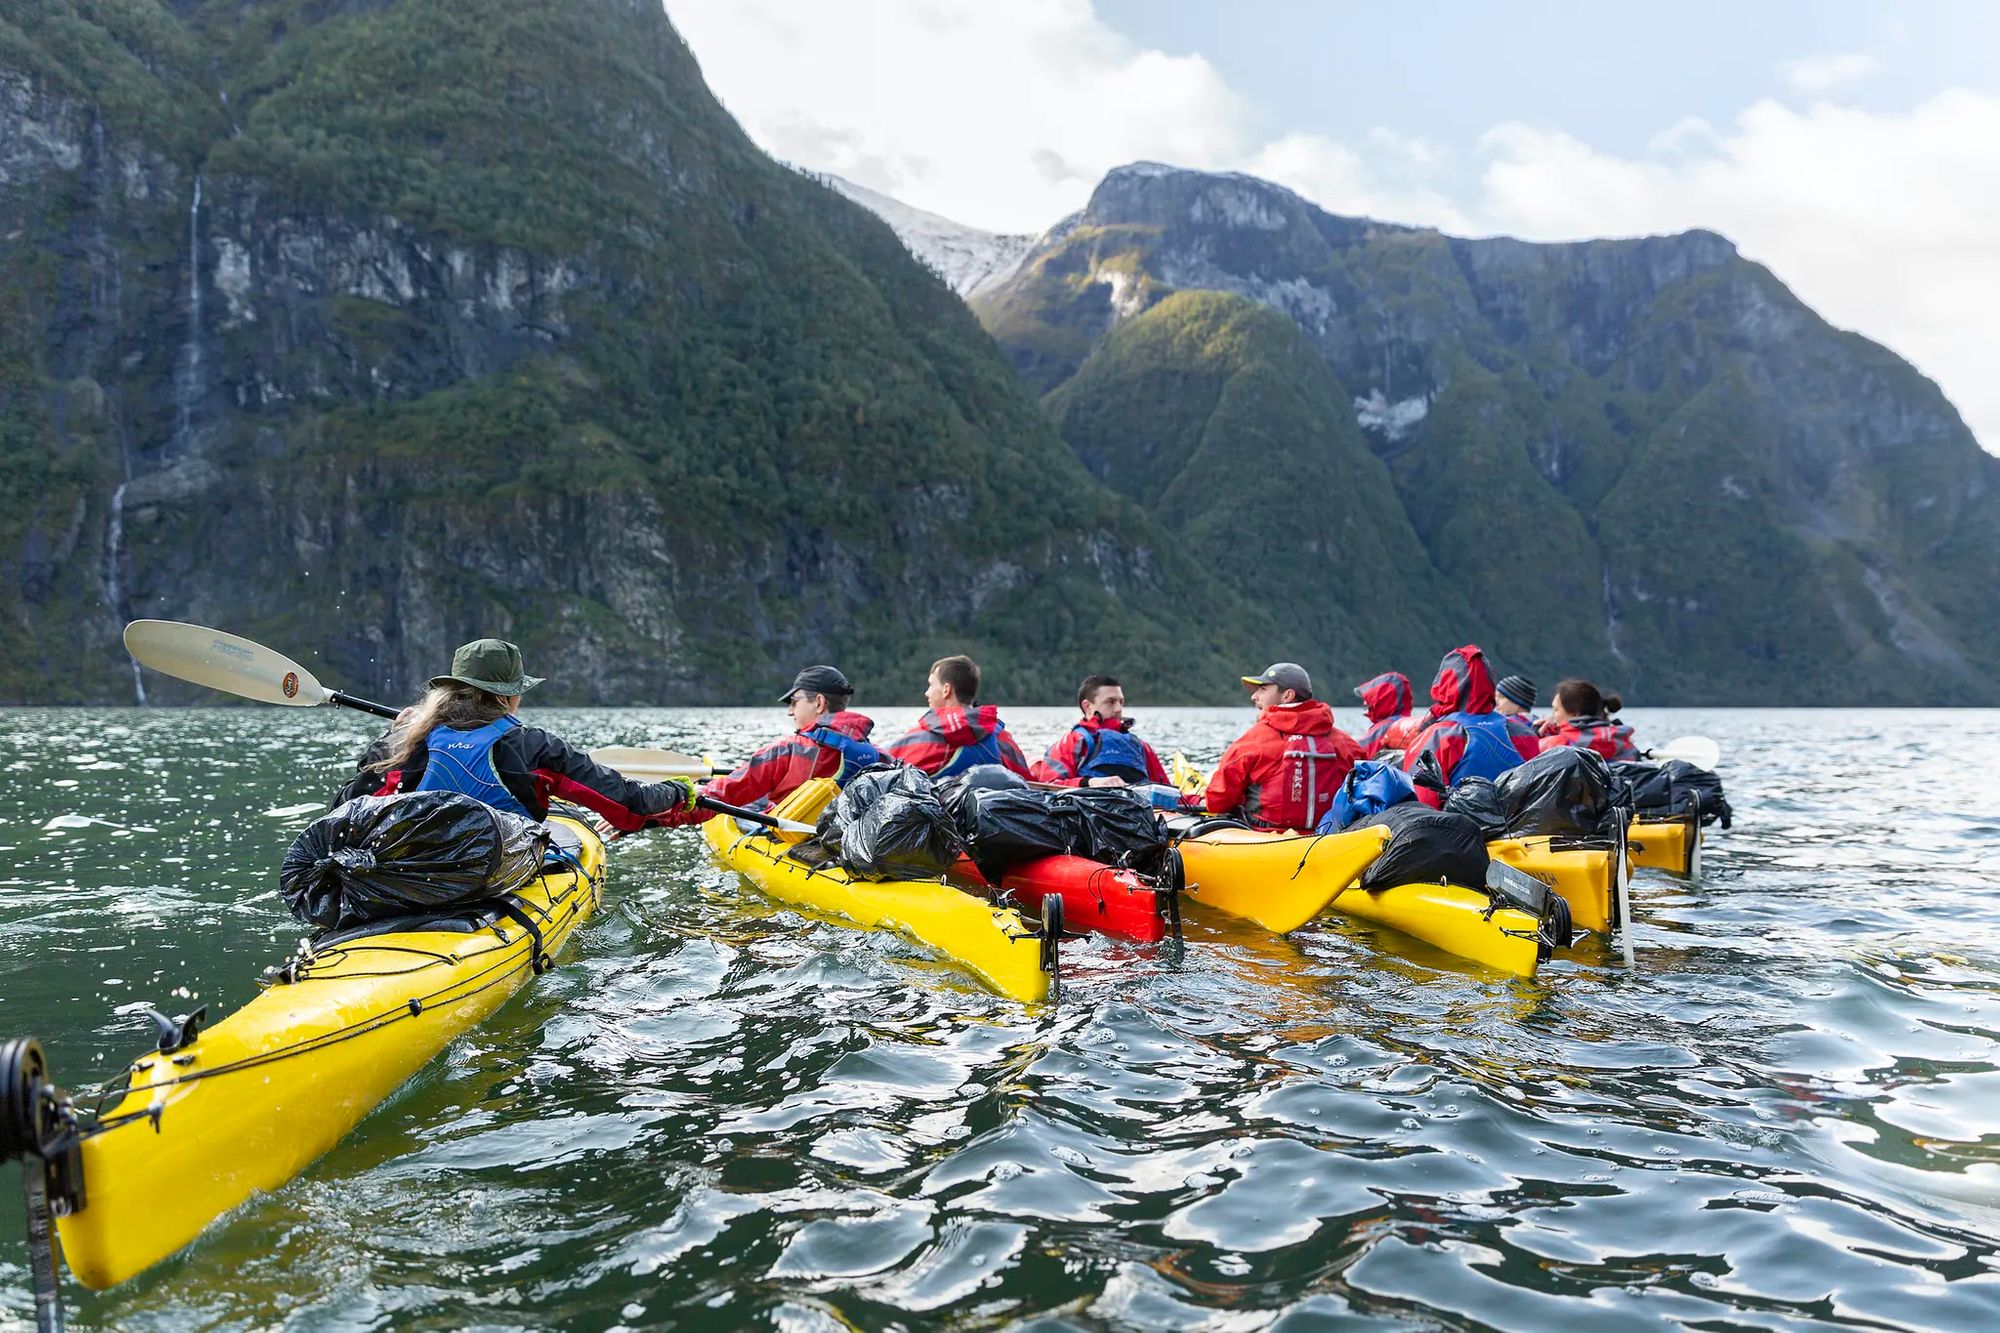 A Much Better Adventures kayak holiday in Norway.